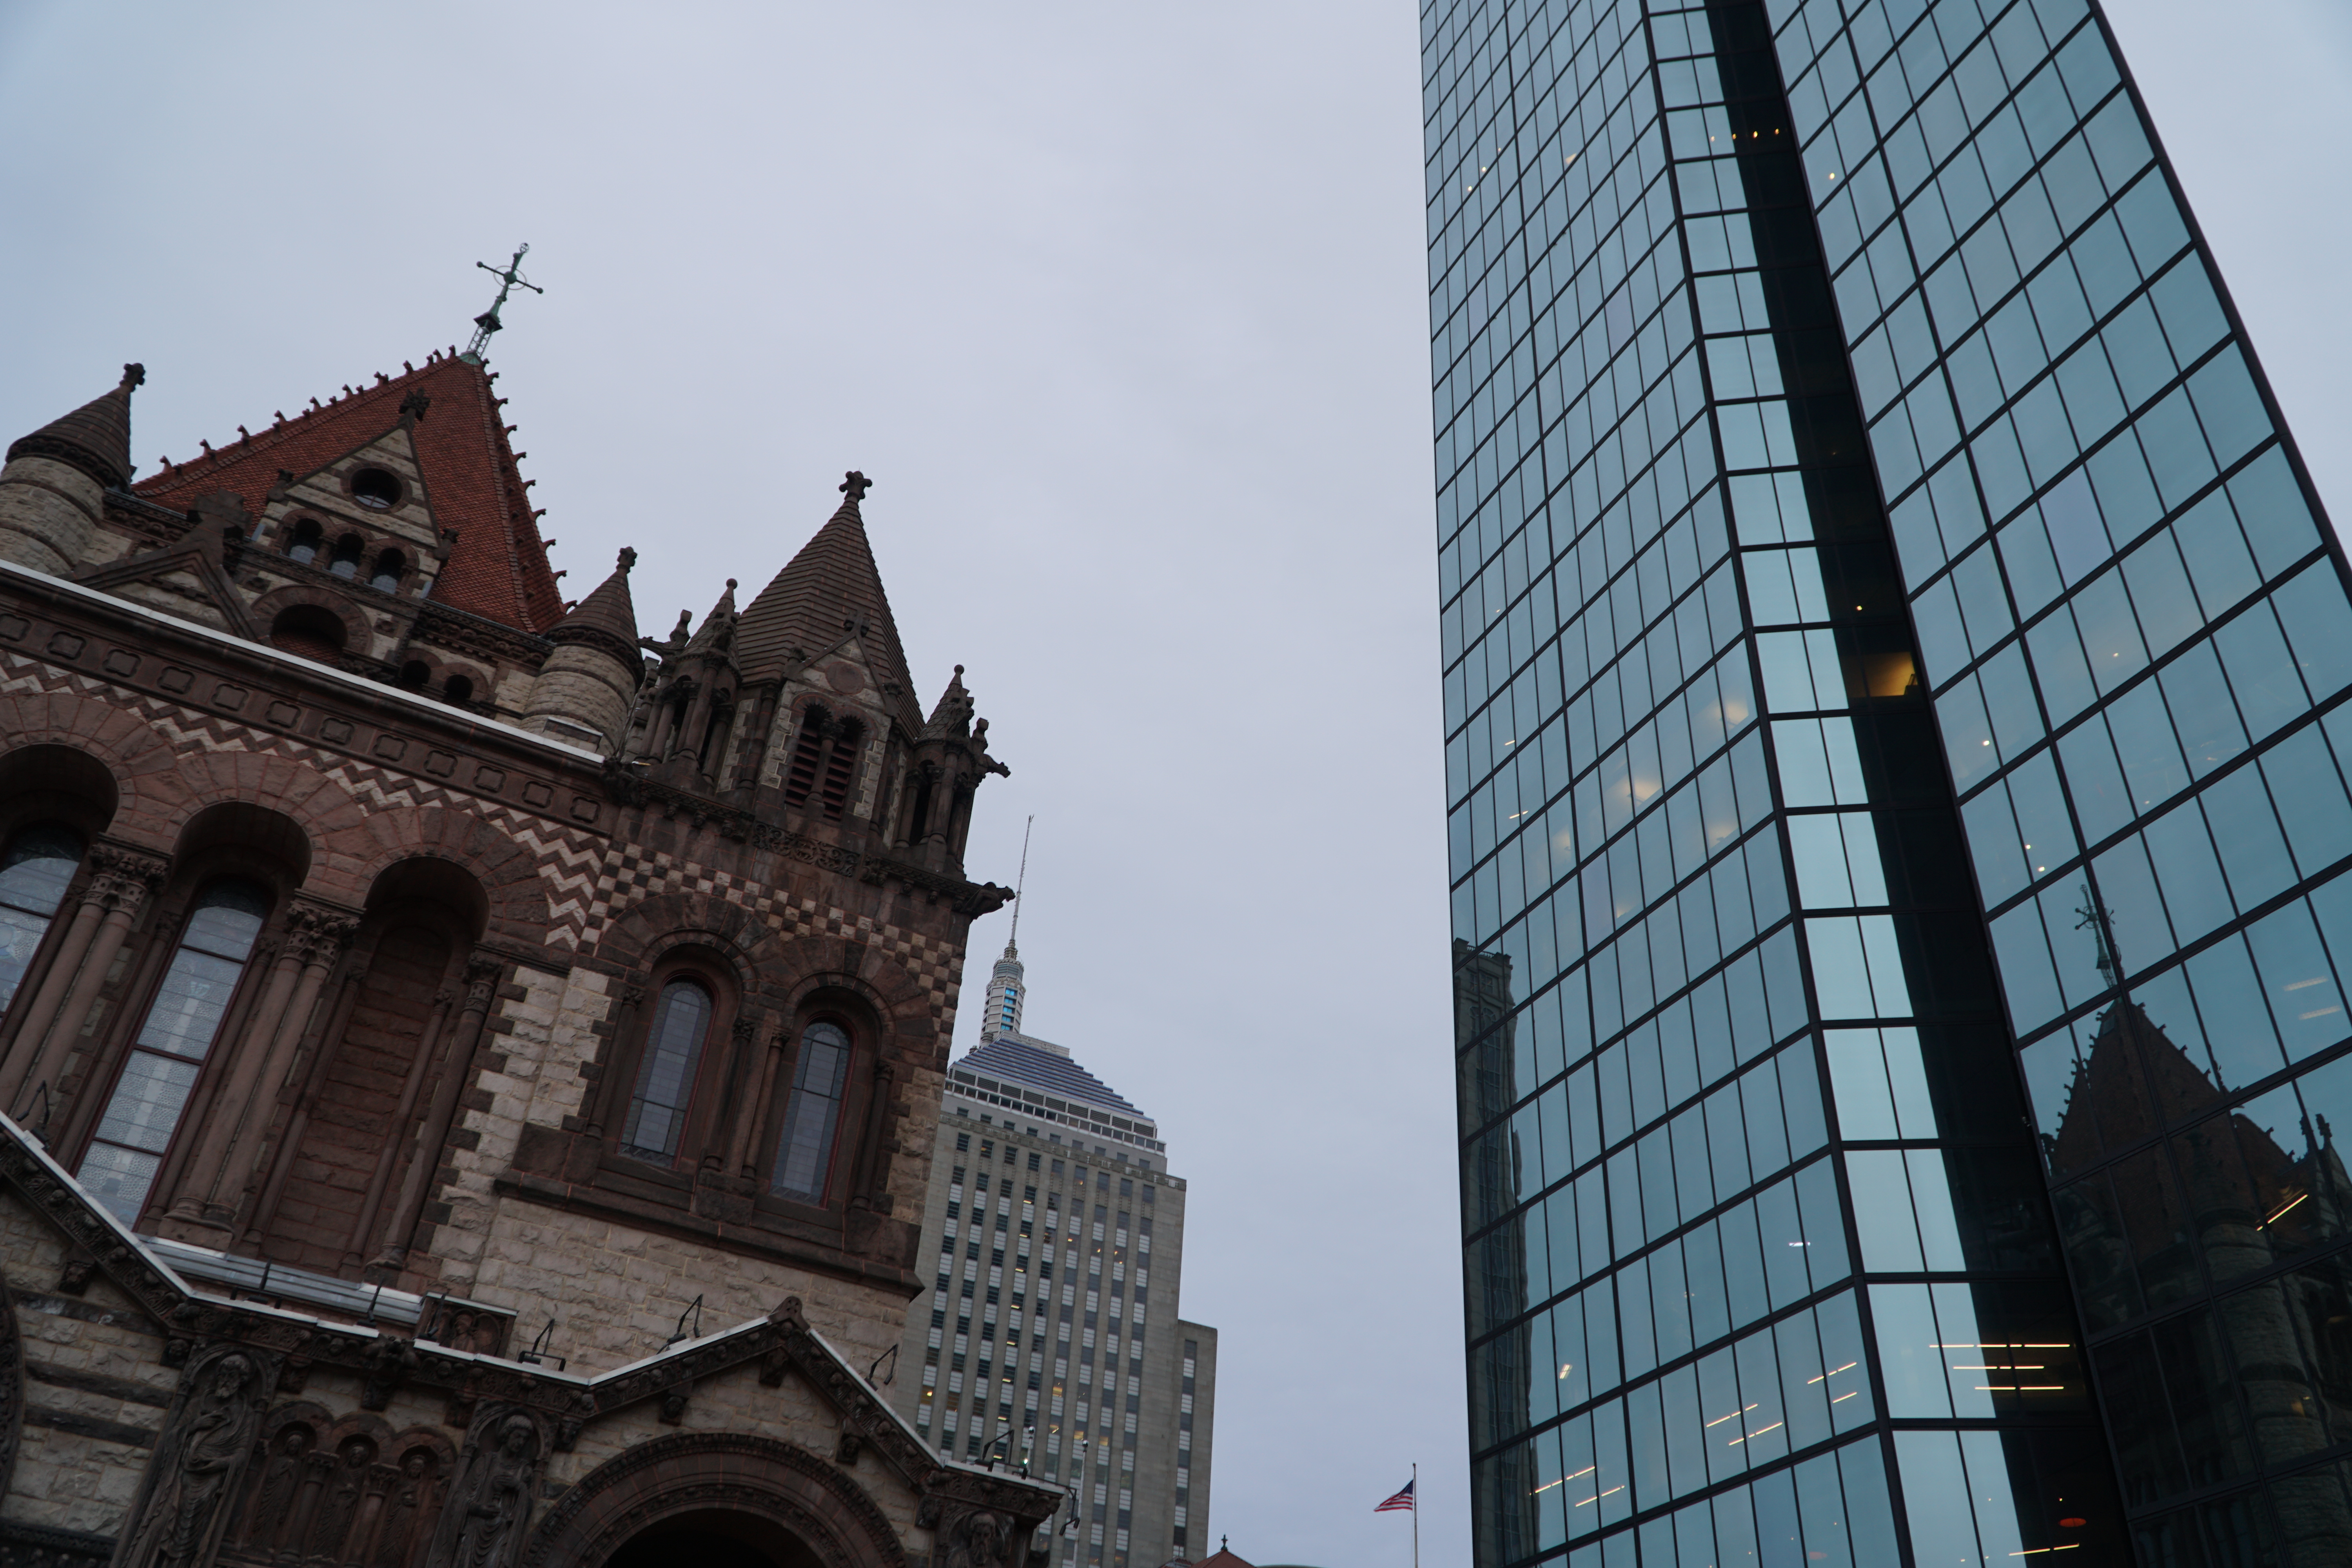 Copley Square - Once and Future City